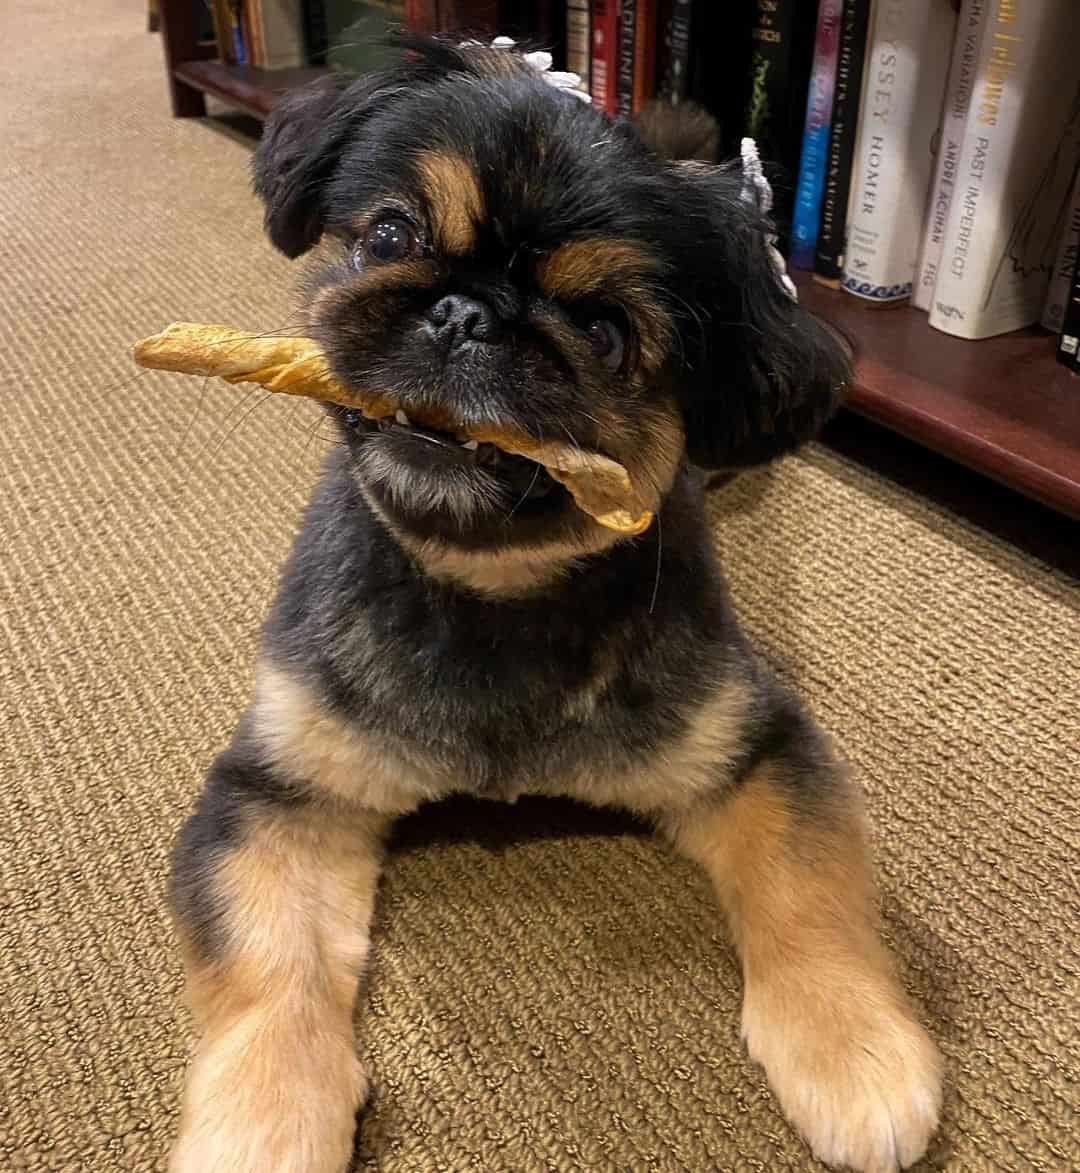 shinese holding bread stick in mouth